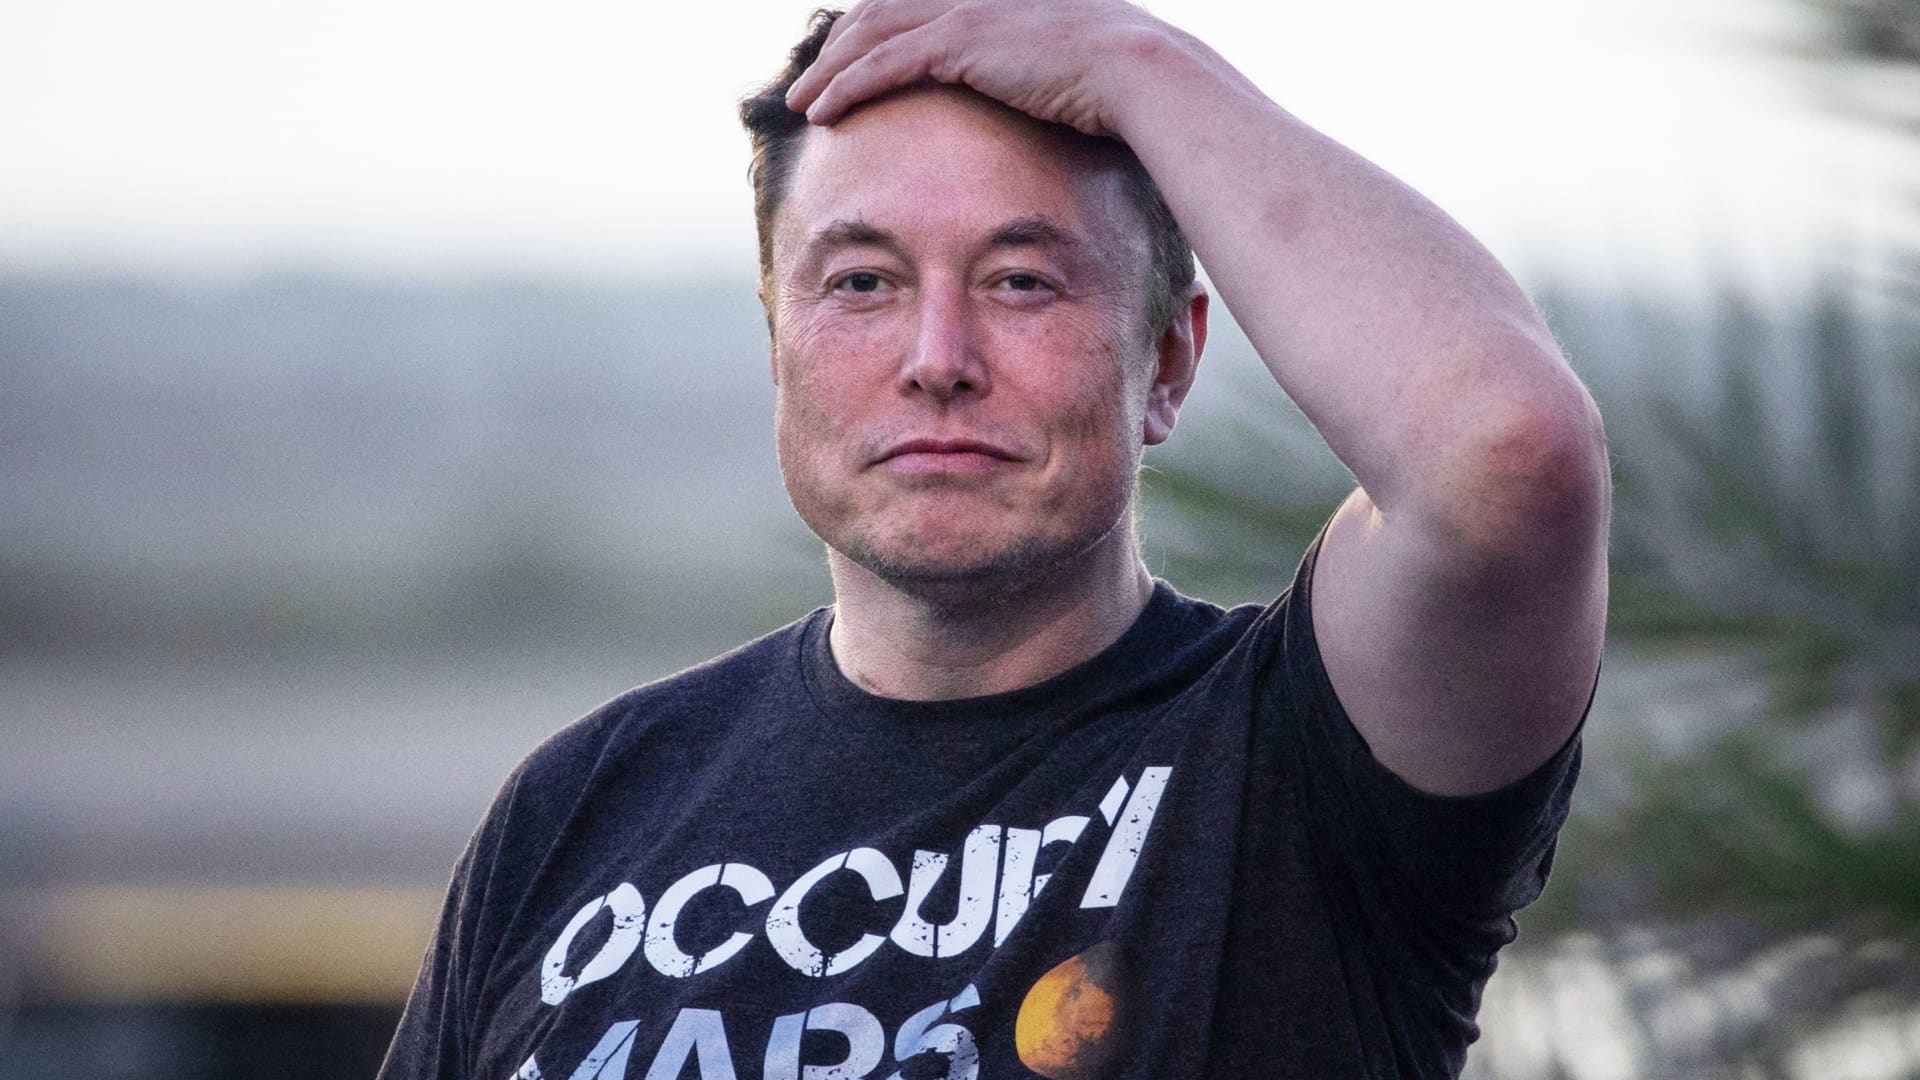 Apple and Elon Musk’s Twitter are on a collision course
– News X